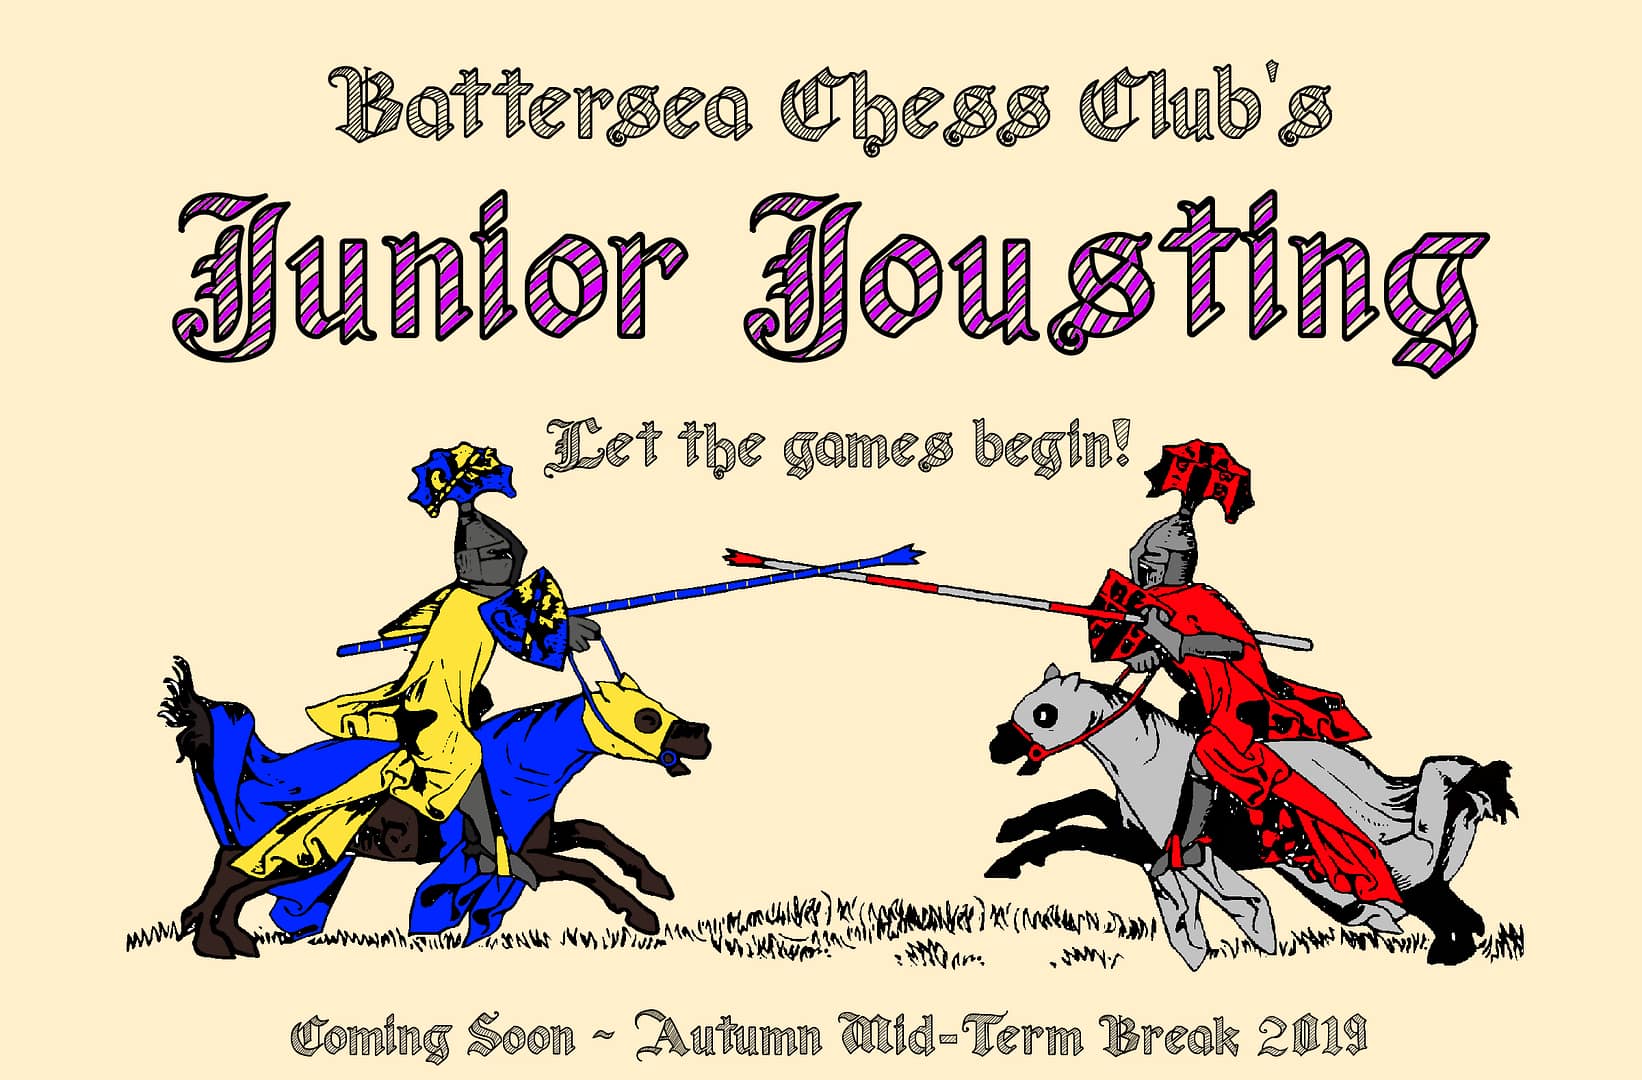 Coming soon: Junior Jousting, our half-term team tournament